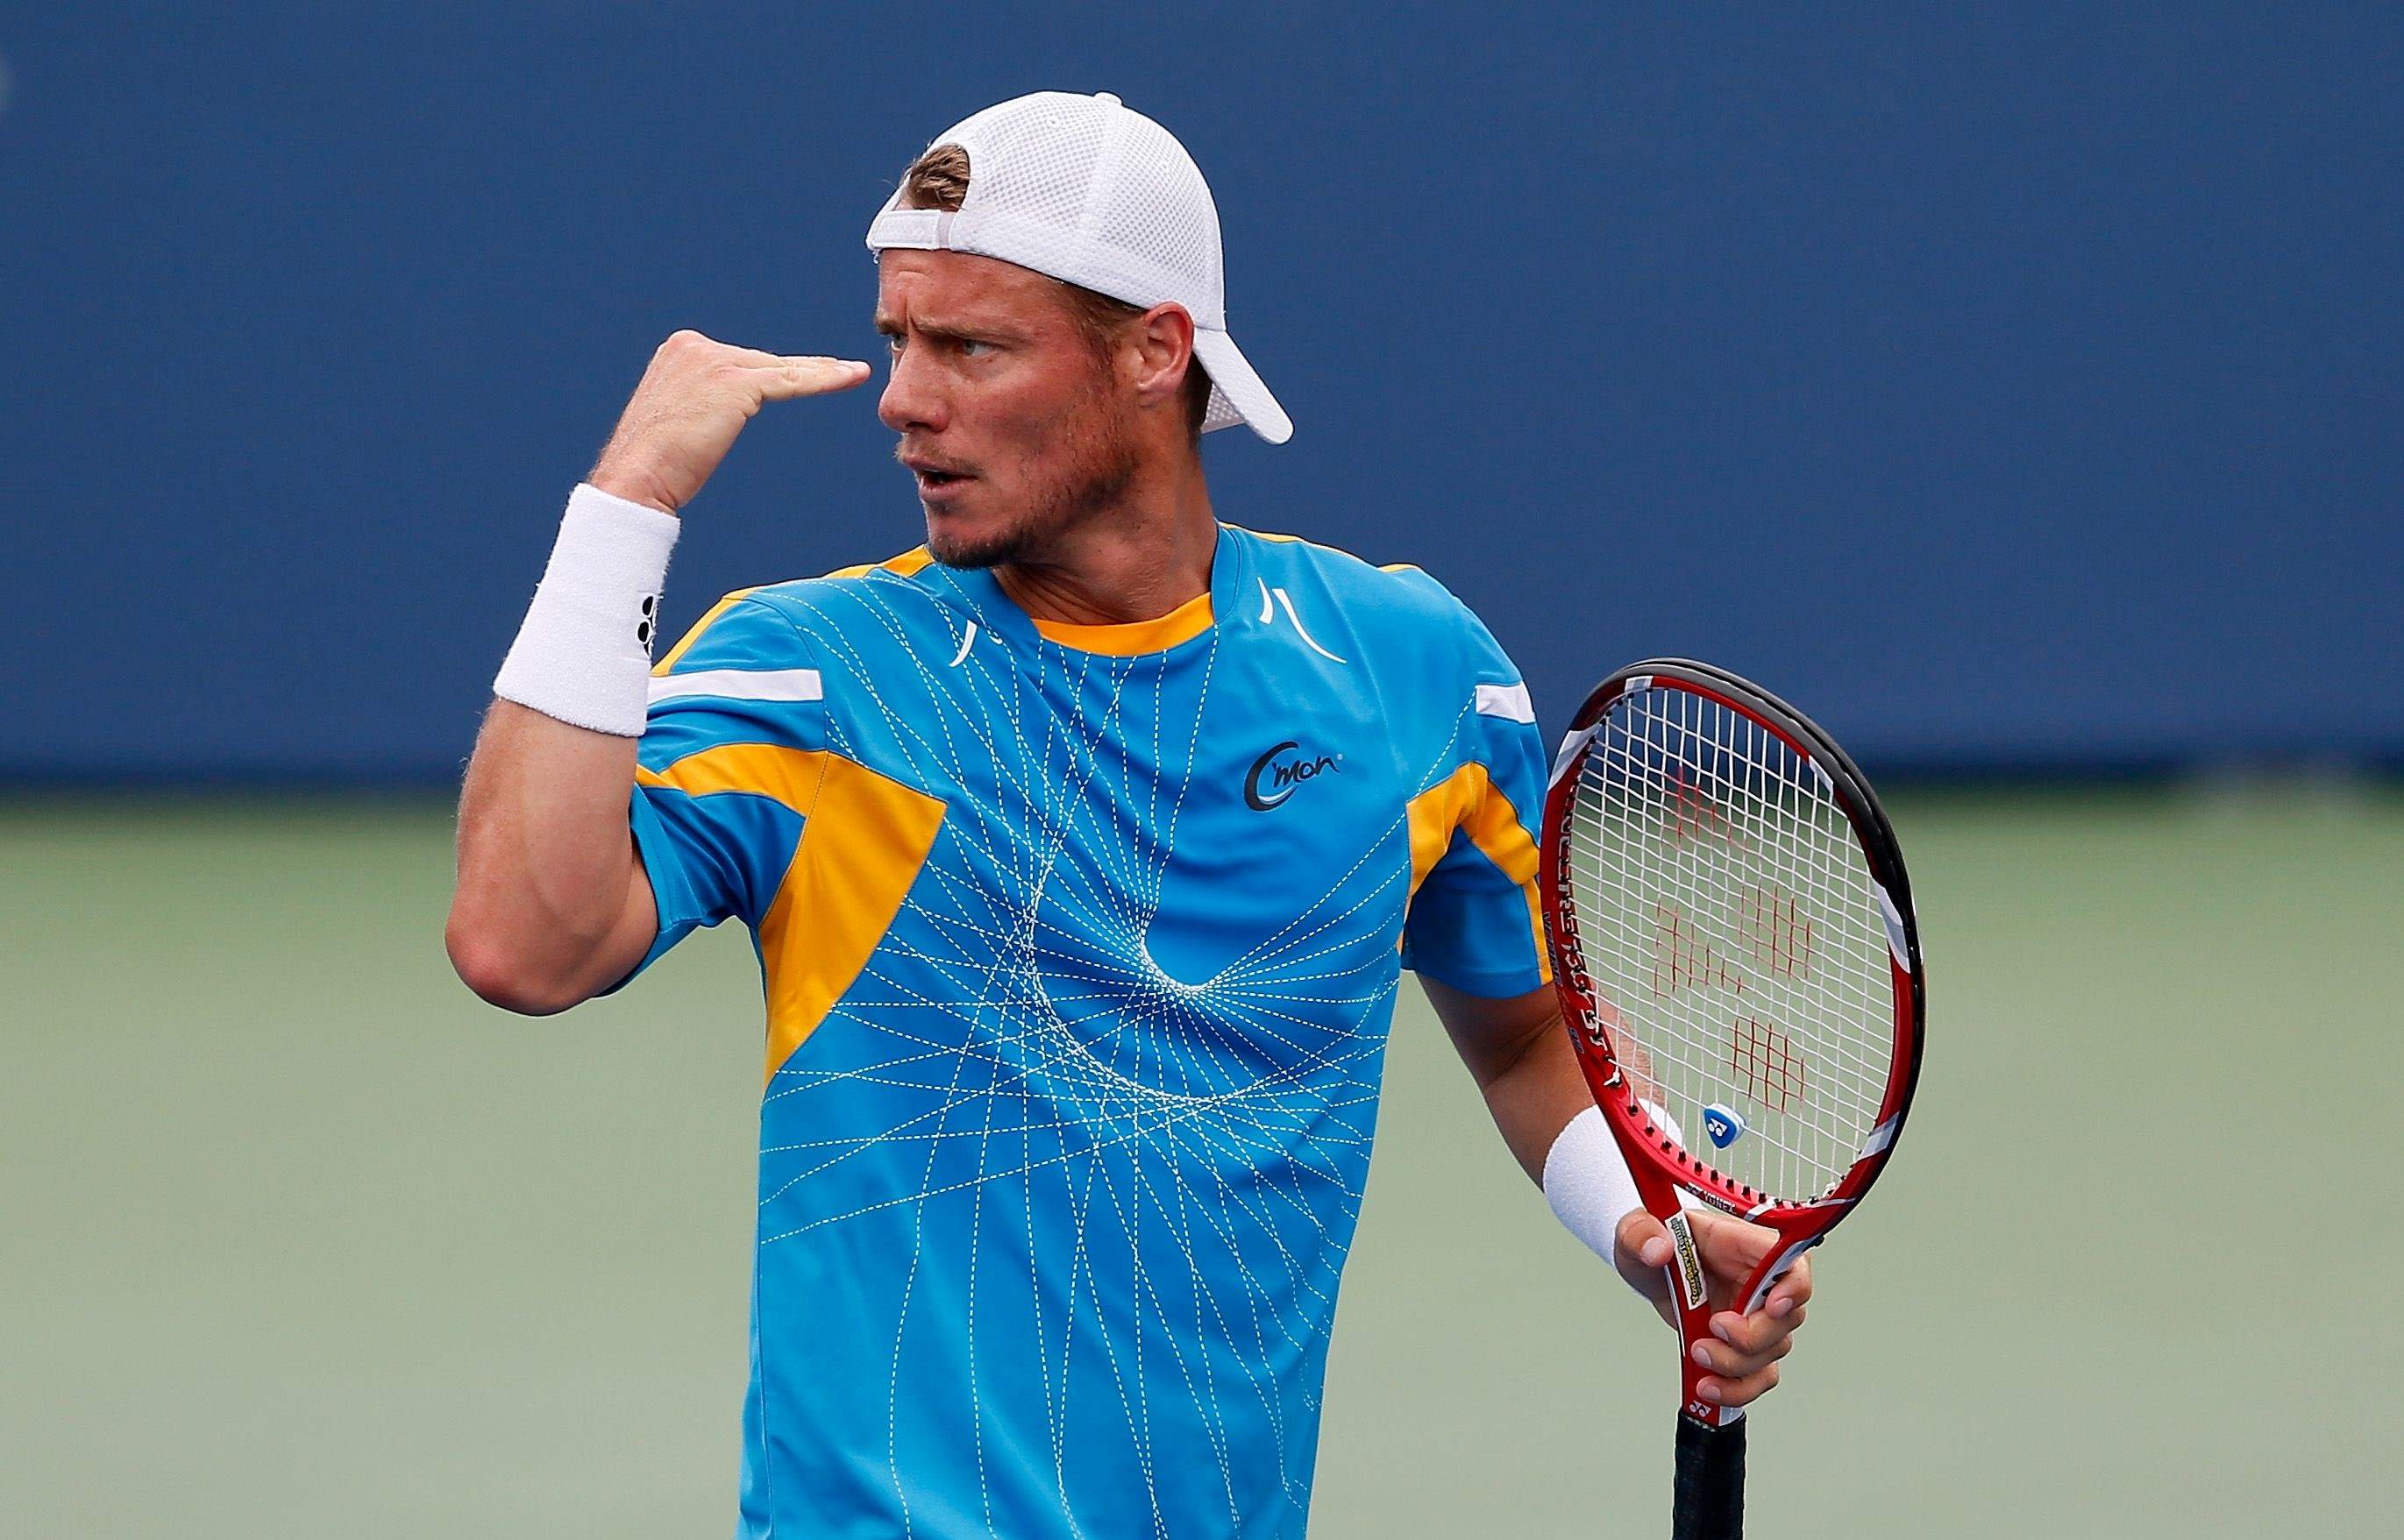 18 Facts About Lleyton Hewitt - Facts.net